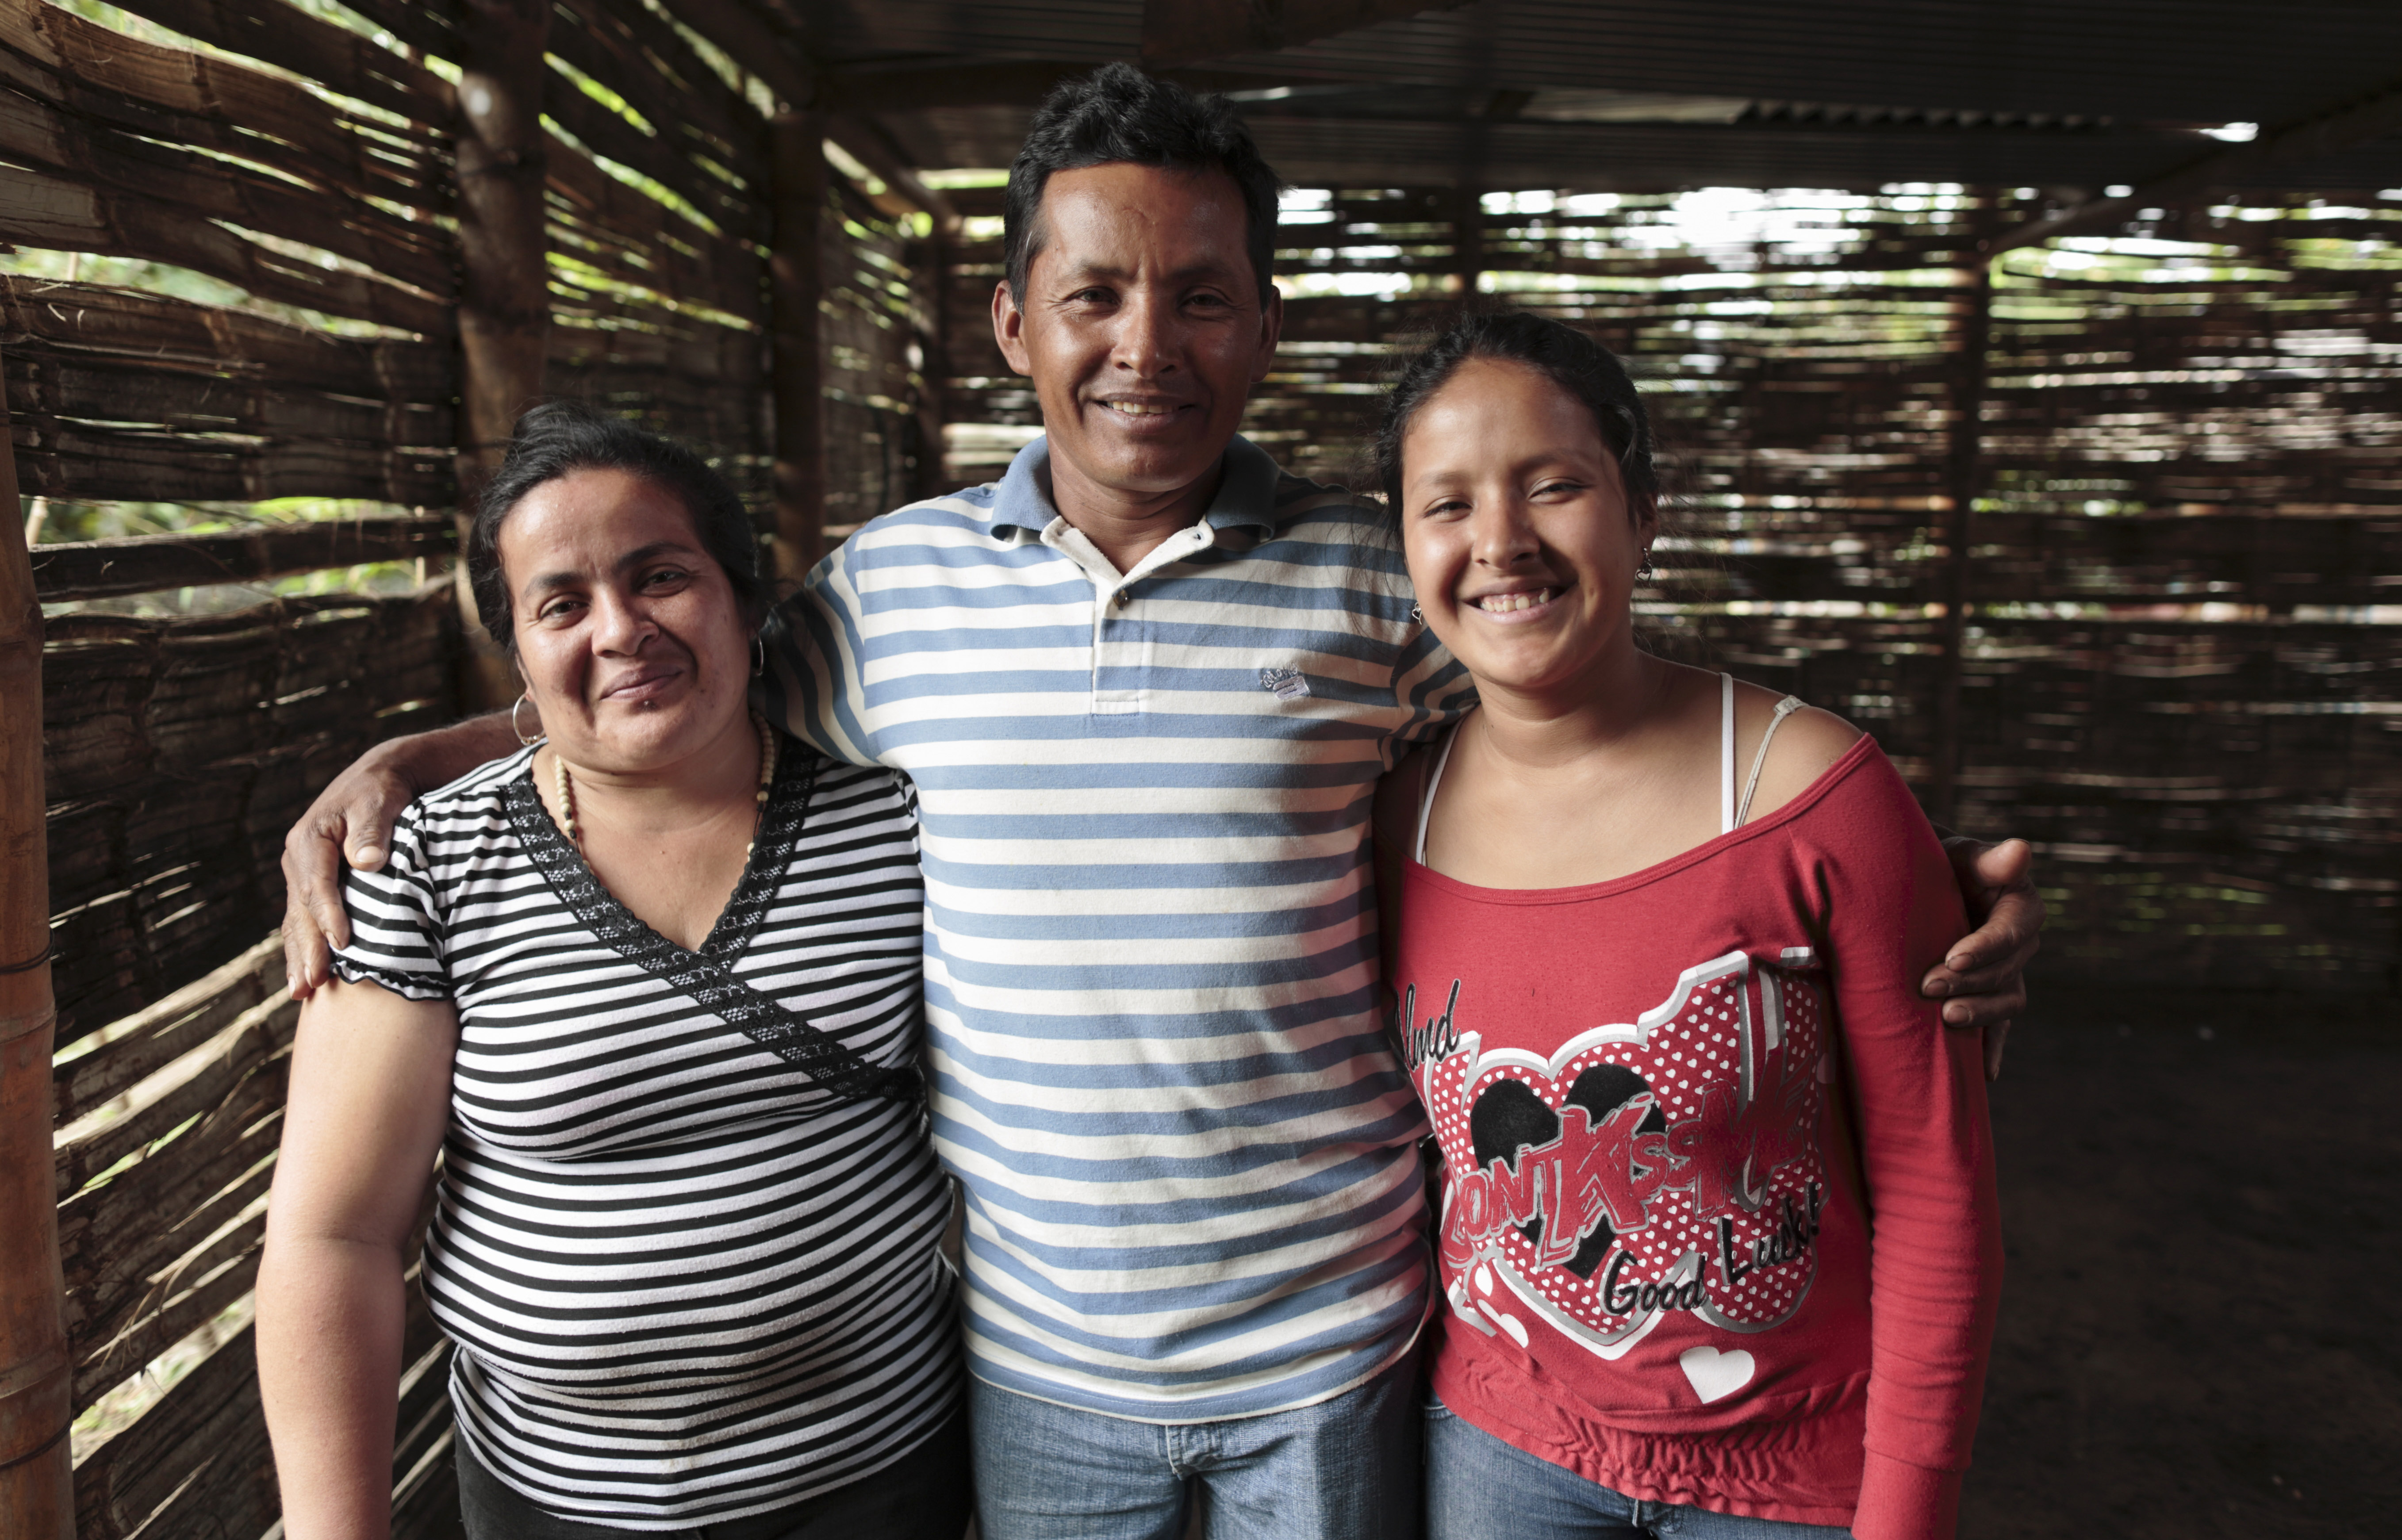 Meet Maria and her family from Colombia.  After fleeing violence in their home state, they have found a new life in the coffee lands in the high Andes Mountains.  Maria is a natural and gifted coffee